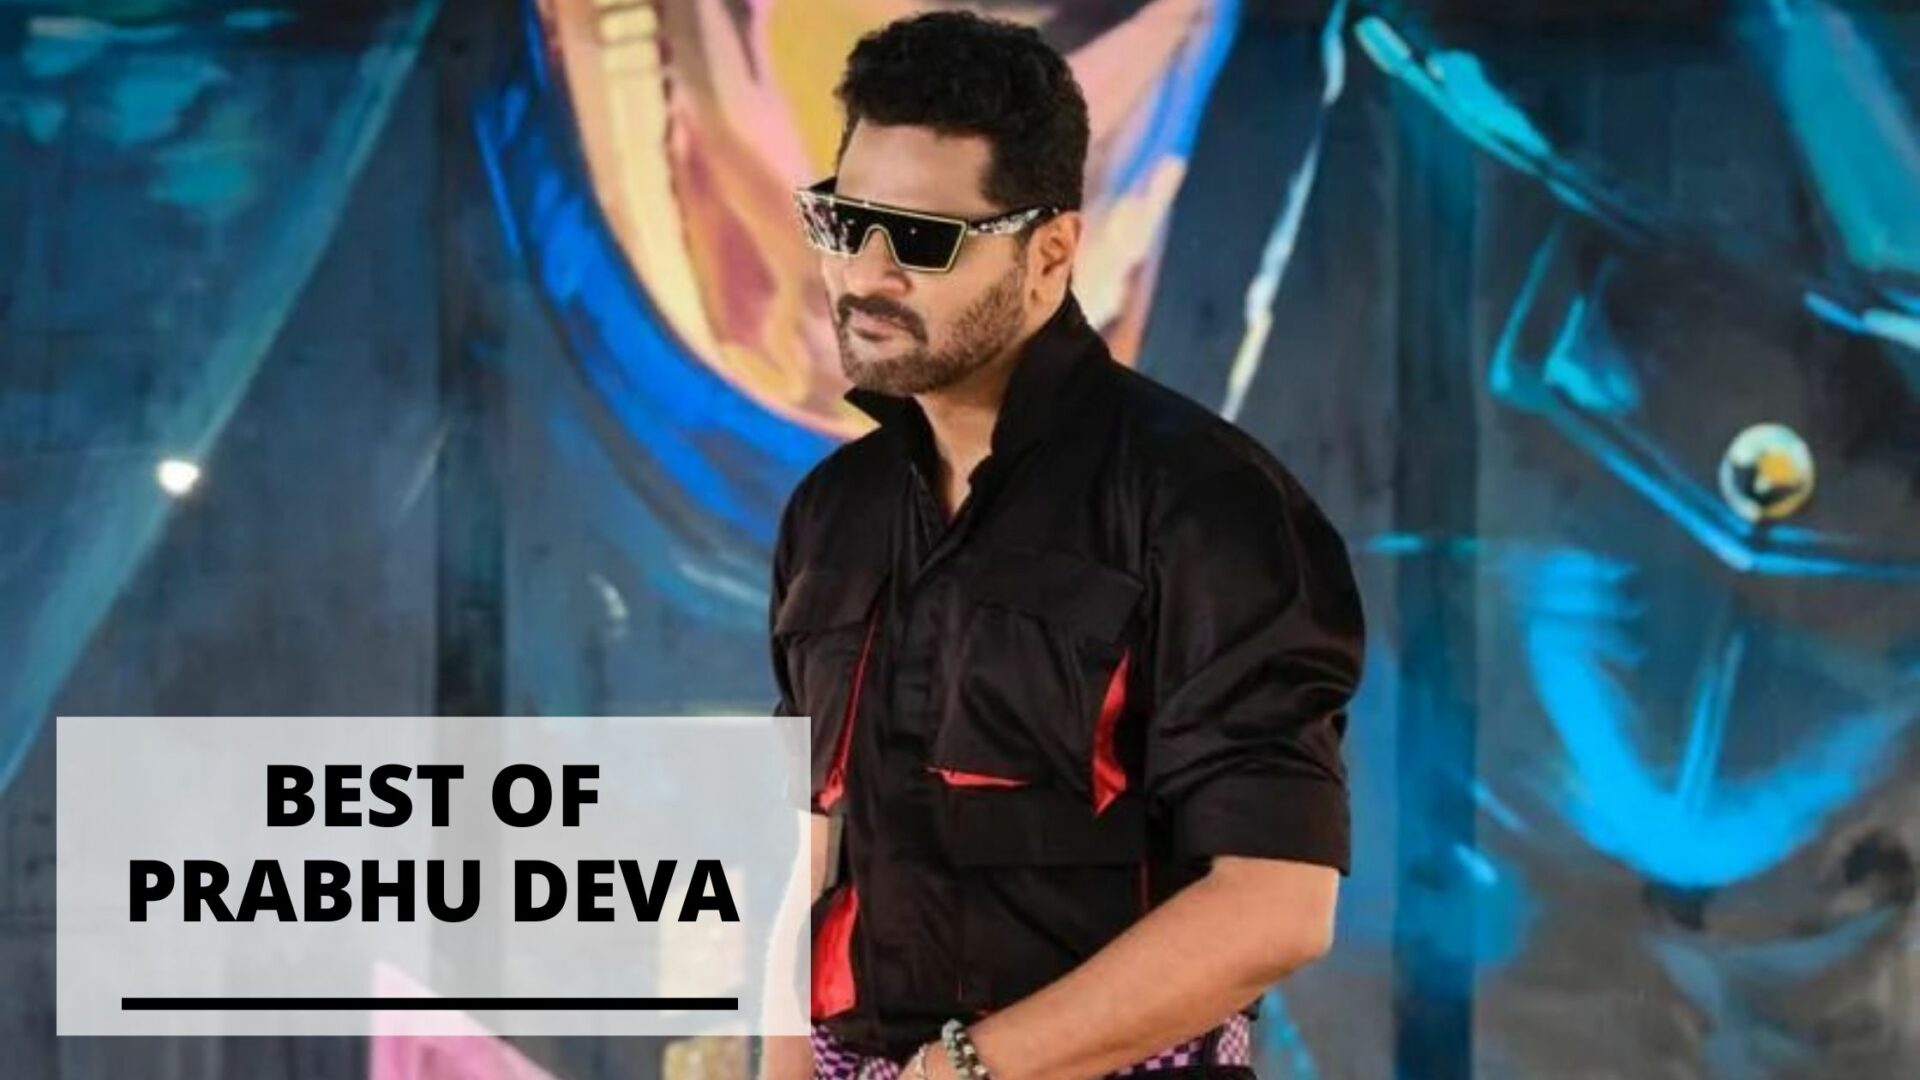 You are currently viewing Dance and Photos of Prabhu Deva